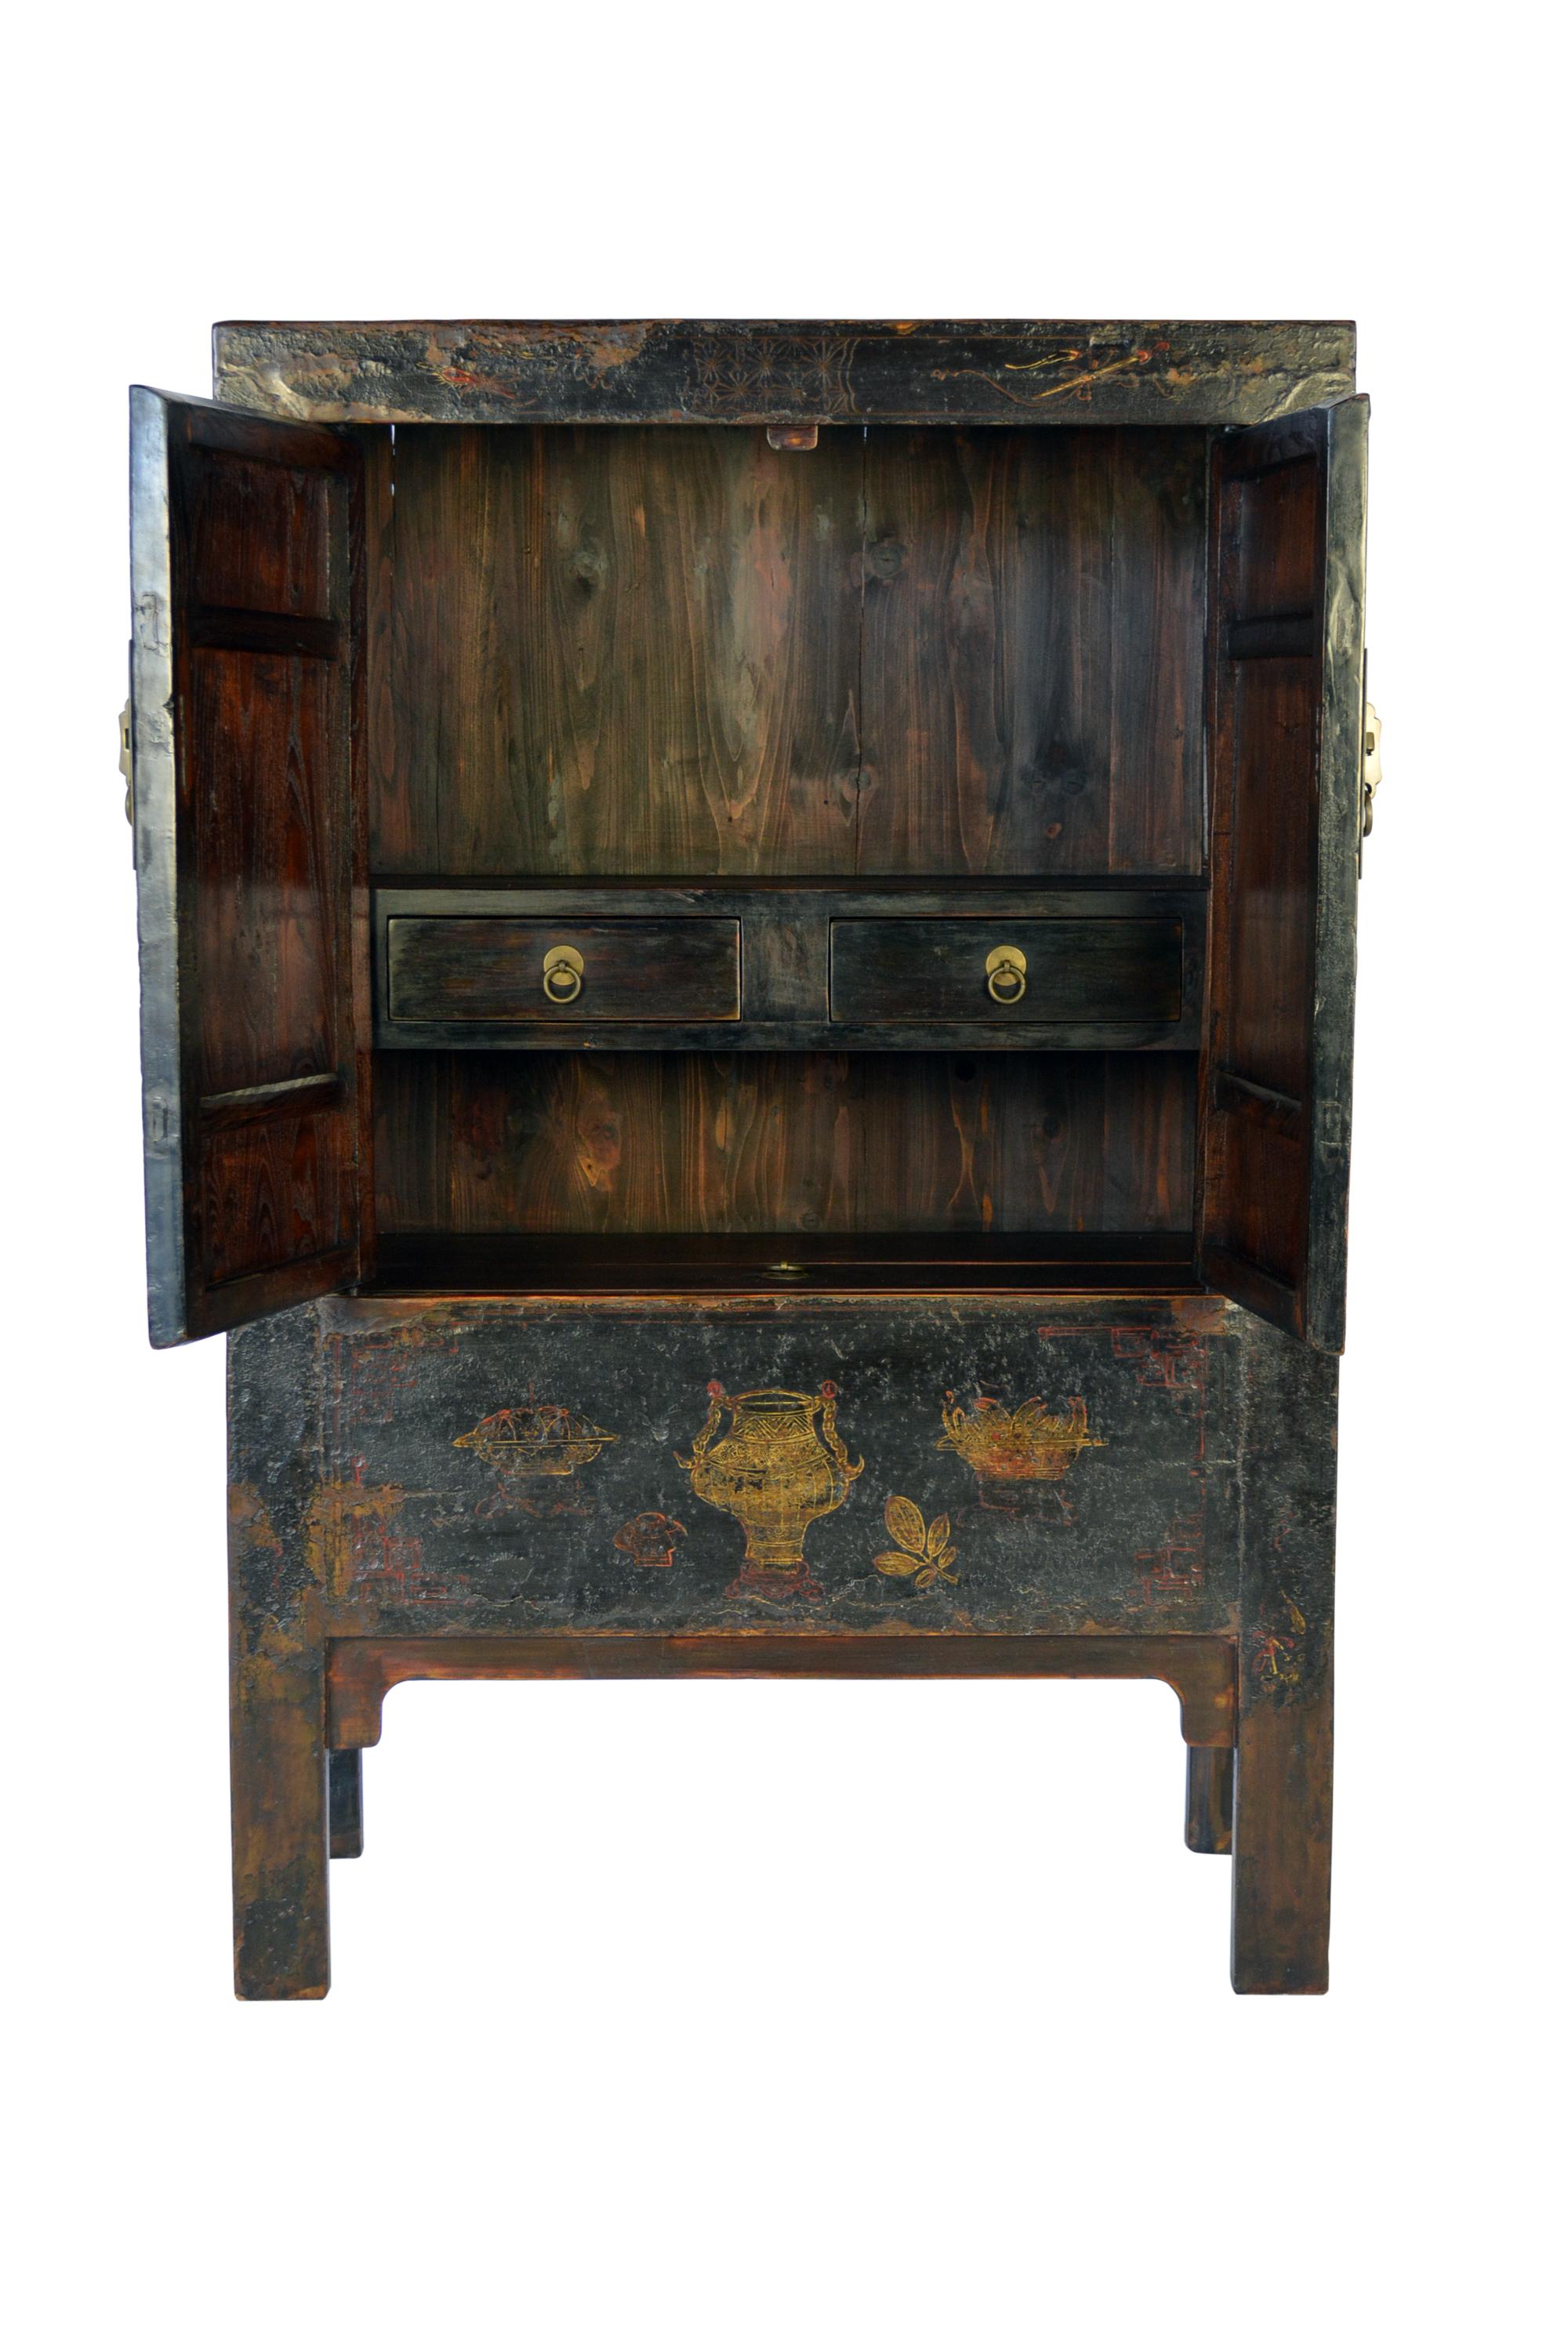 This black lacquer cabinet has a mitered body frame with floating panels. The thick lacquer finishes are well preserved; however, the gilt paintings are quite worn already. From the remaining traces of the paintings, we can see motifs of the eight